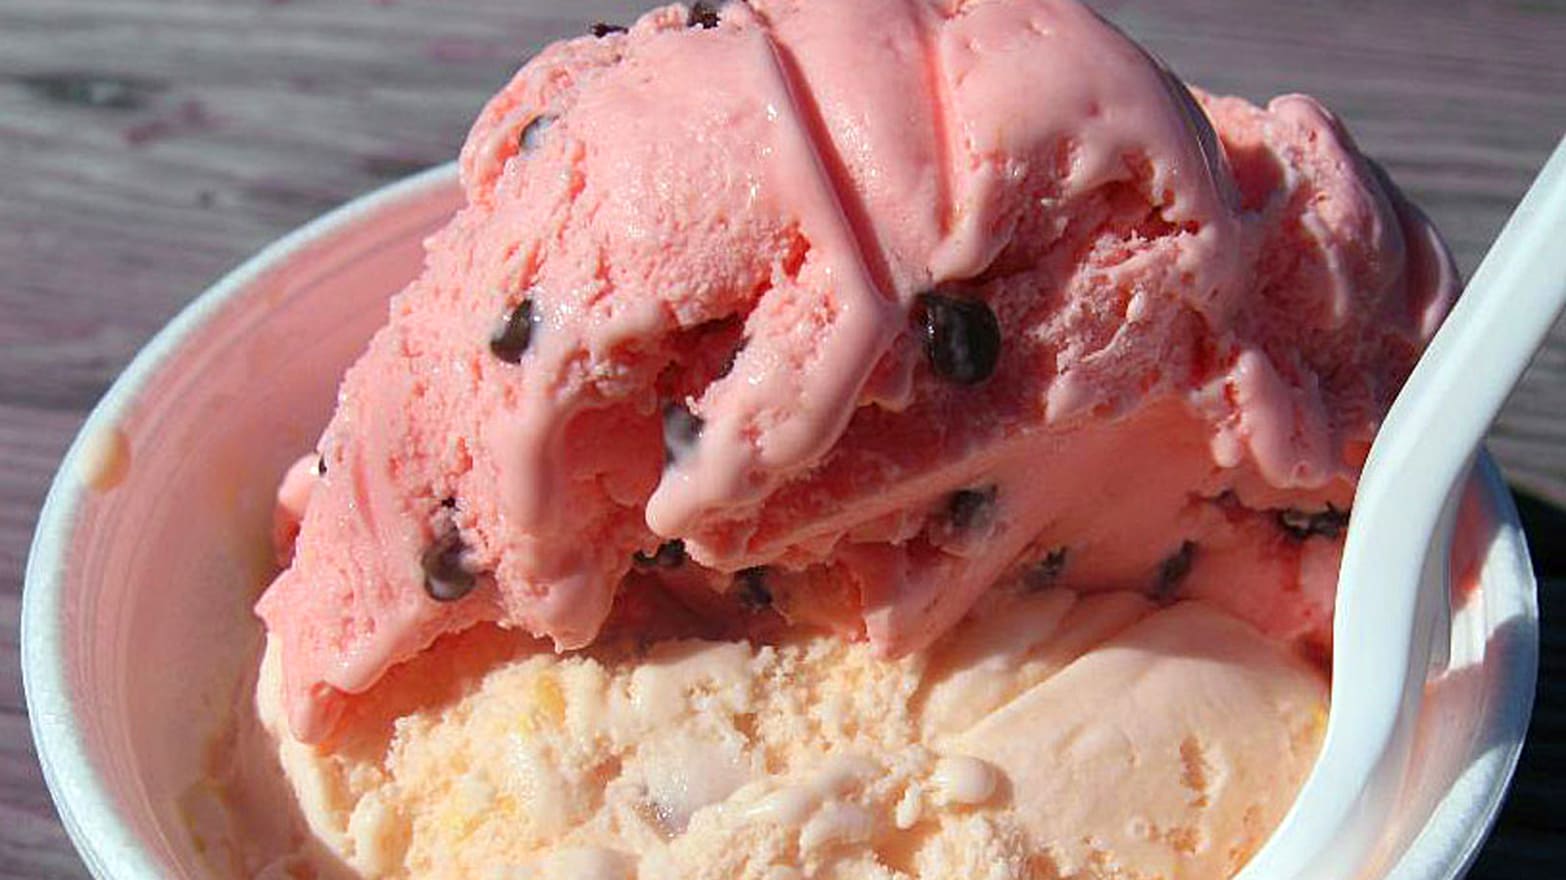 The Secret To This Ice Cream Pampered Cows